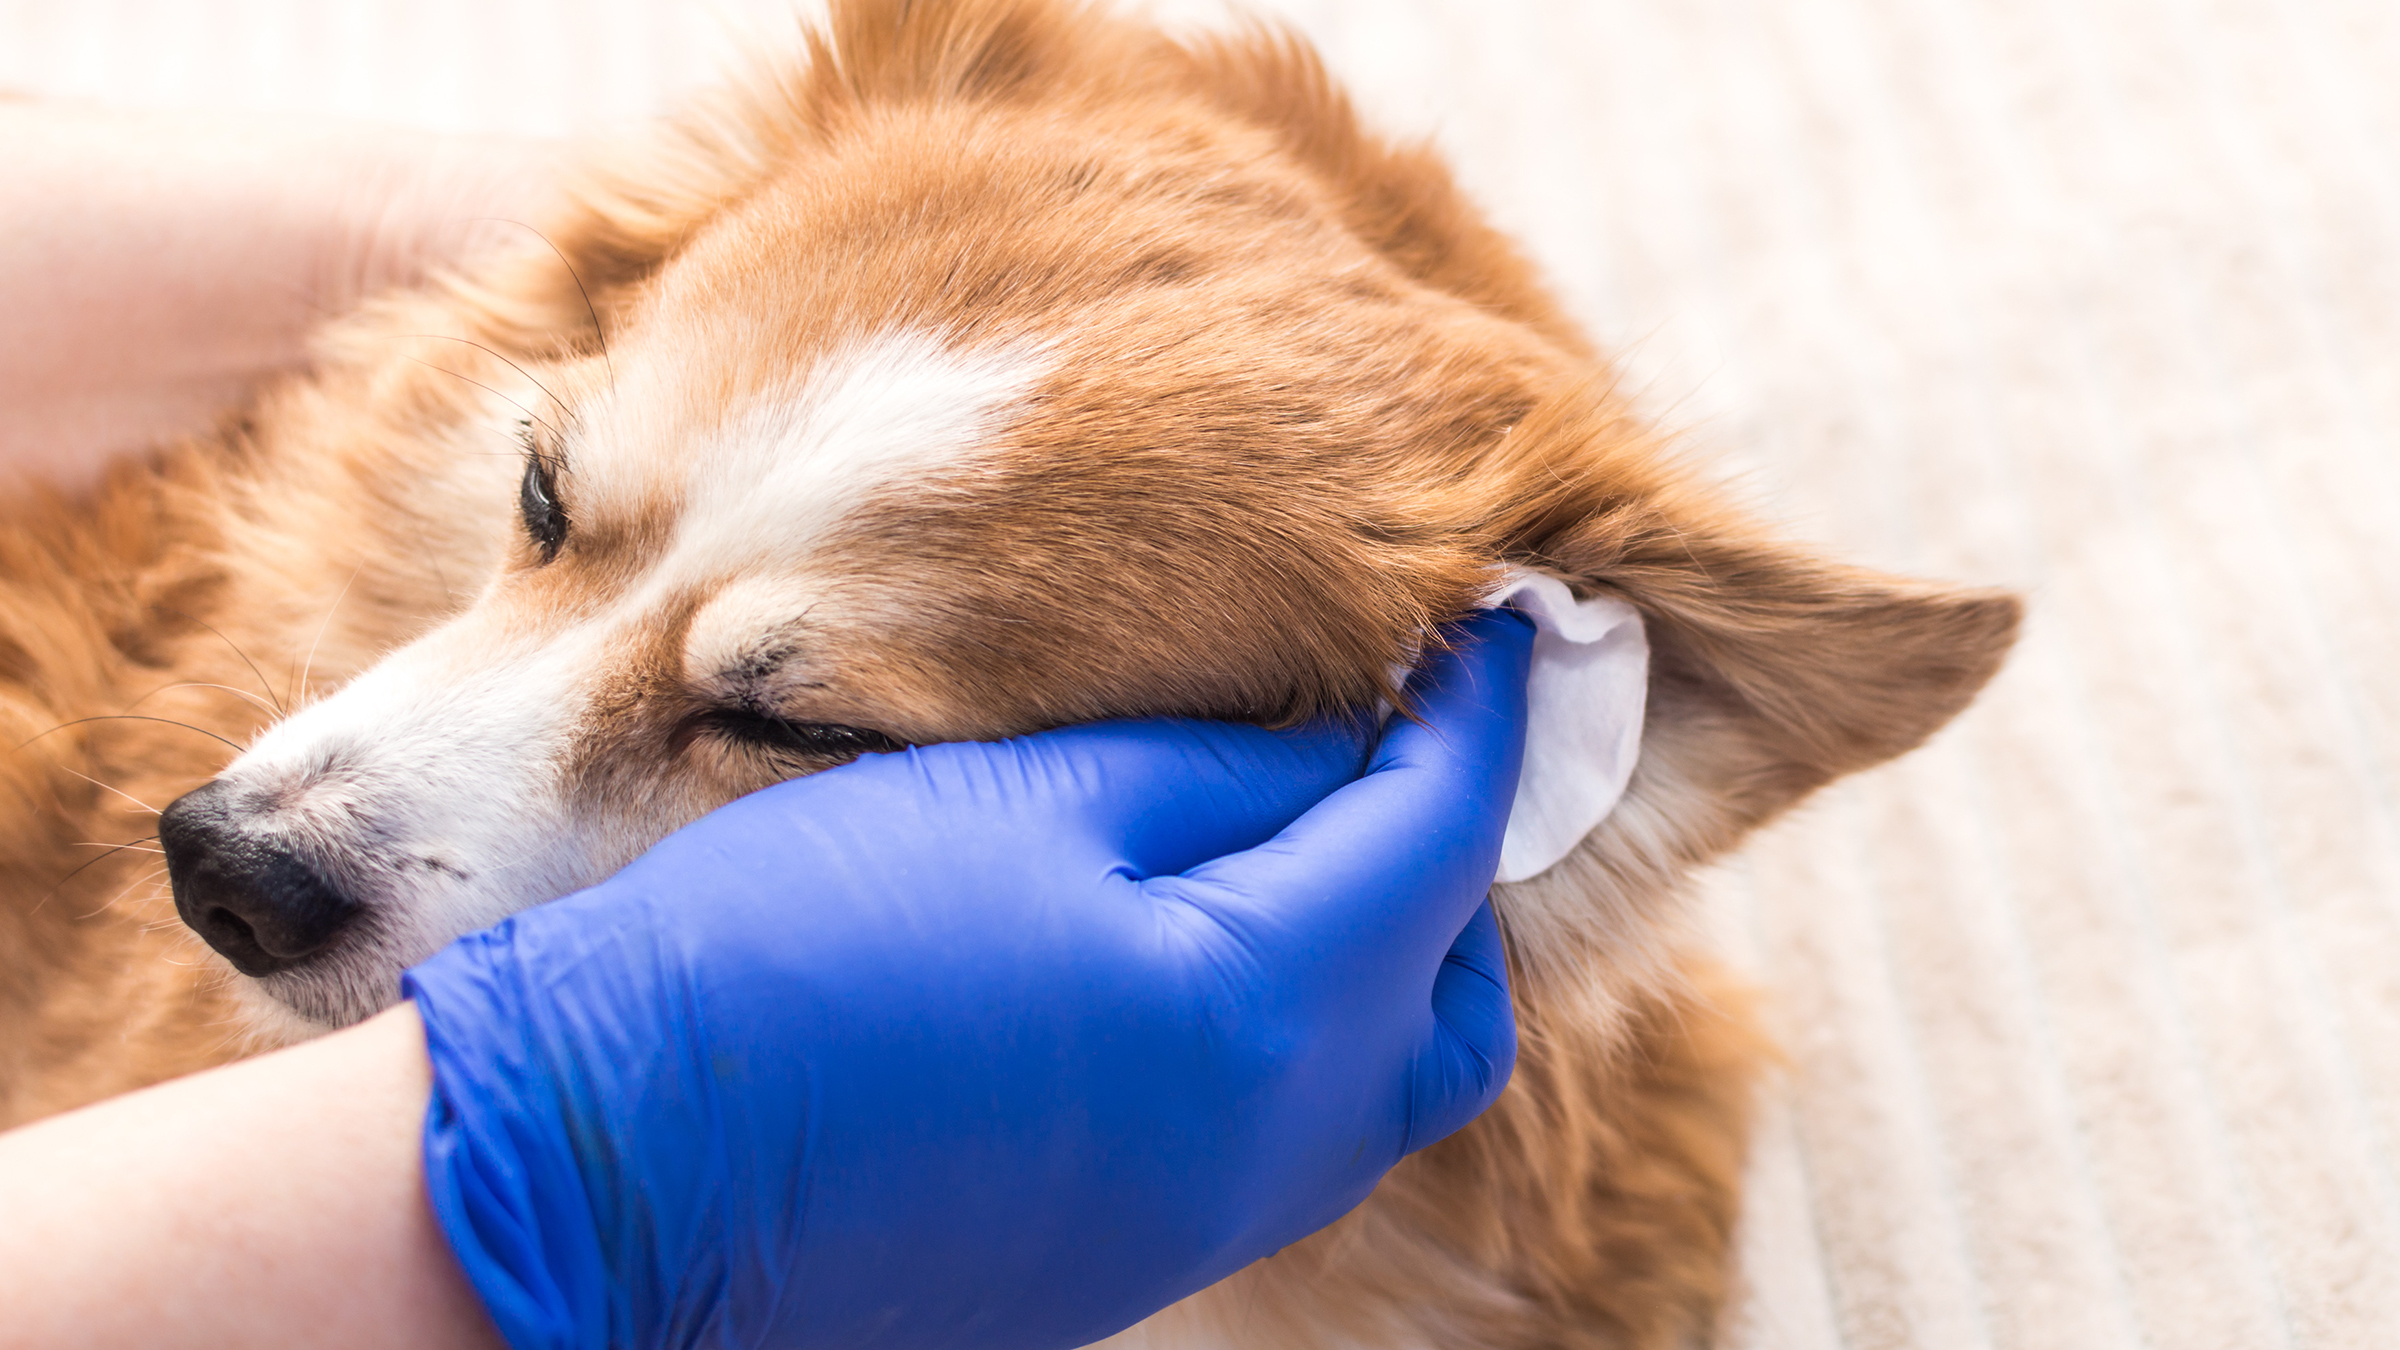 There are many types of dog skin care medications available on the market today. Some common types of medications are flea and tick products, shampoos and conditioners, and anti-inflammatory medications.